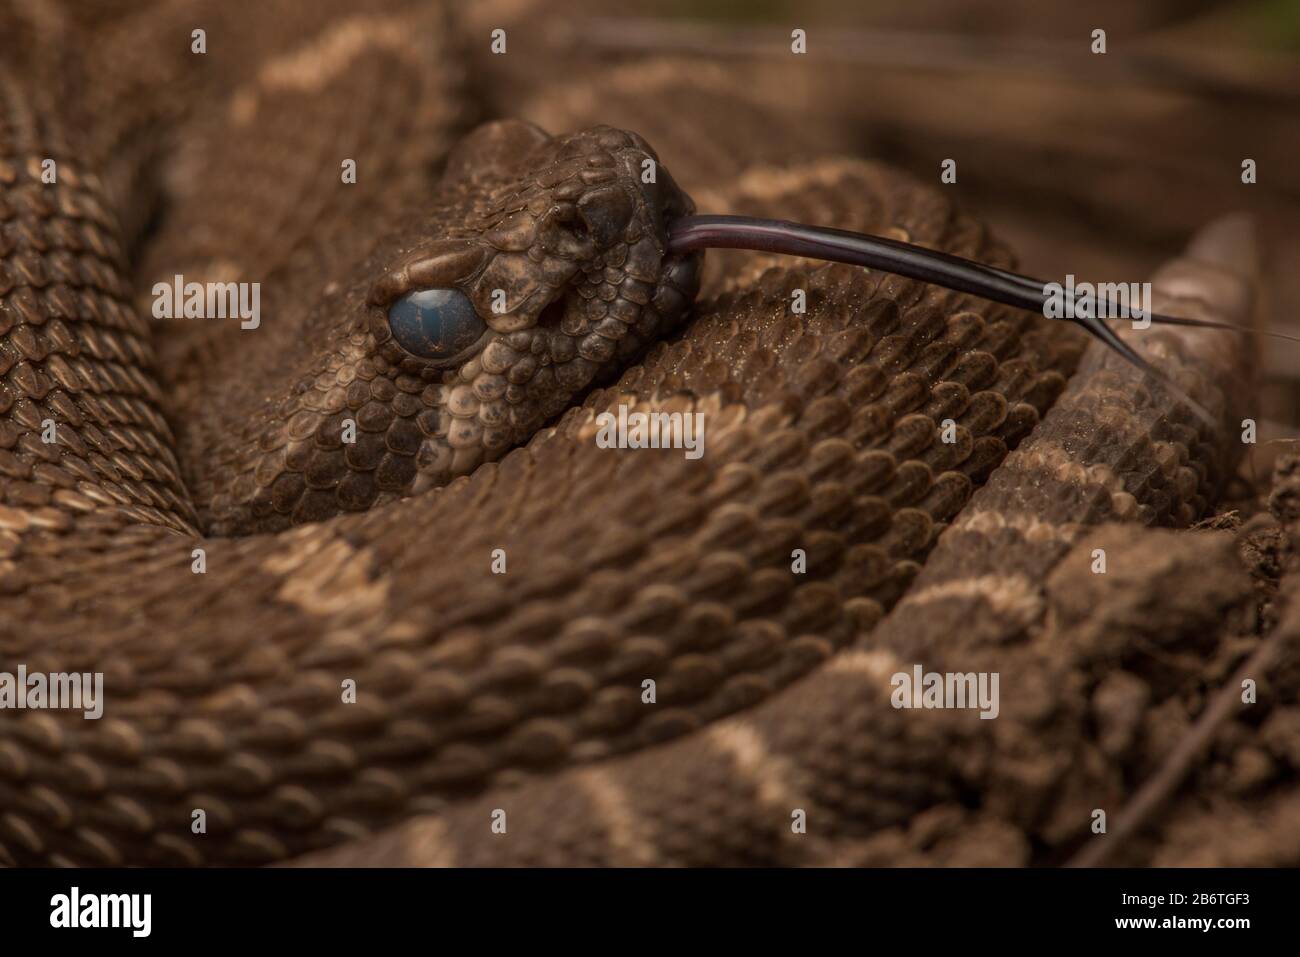 A northern pacific rattlesnake (Crotalus oreganus) from the Berkeley hills.  This one is just a baby snake as evidenced by its tiny rattle. Stock Photo